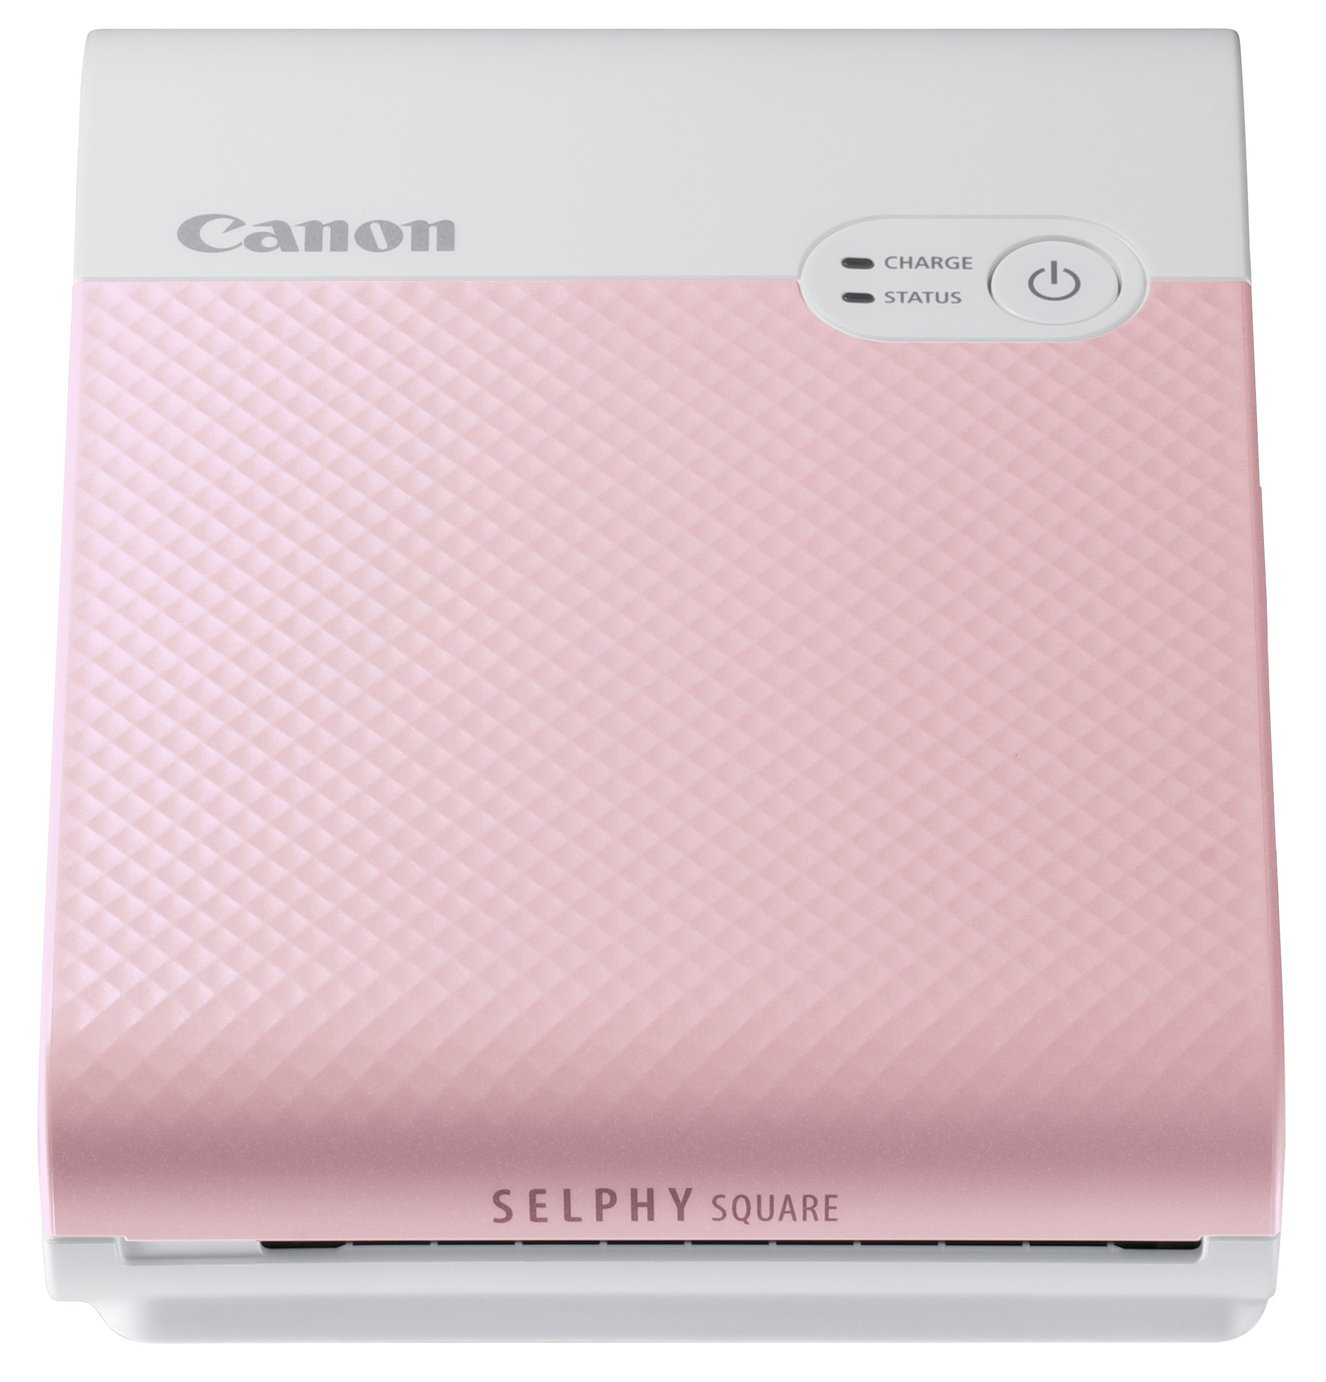 Canon Selphy Square QX10 Photo Printer Review